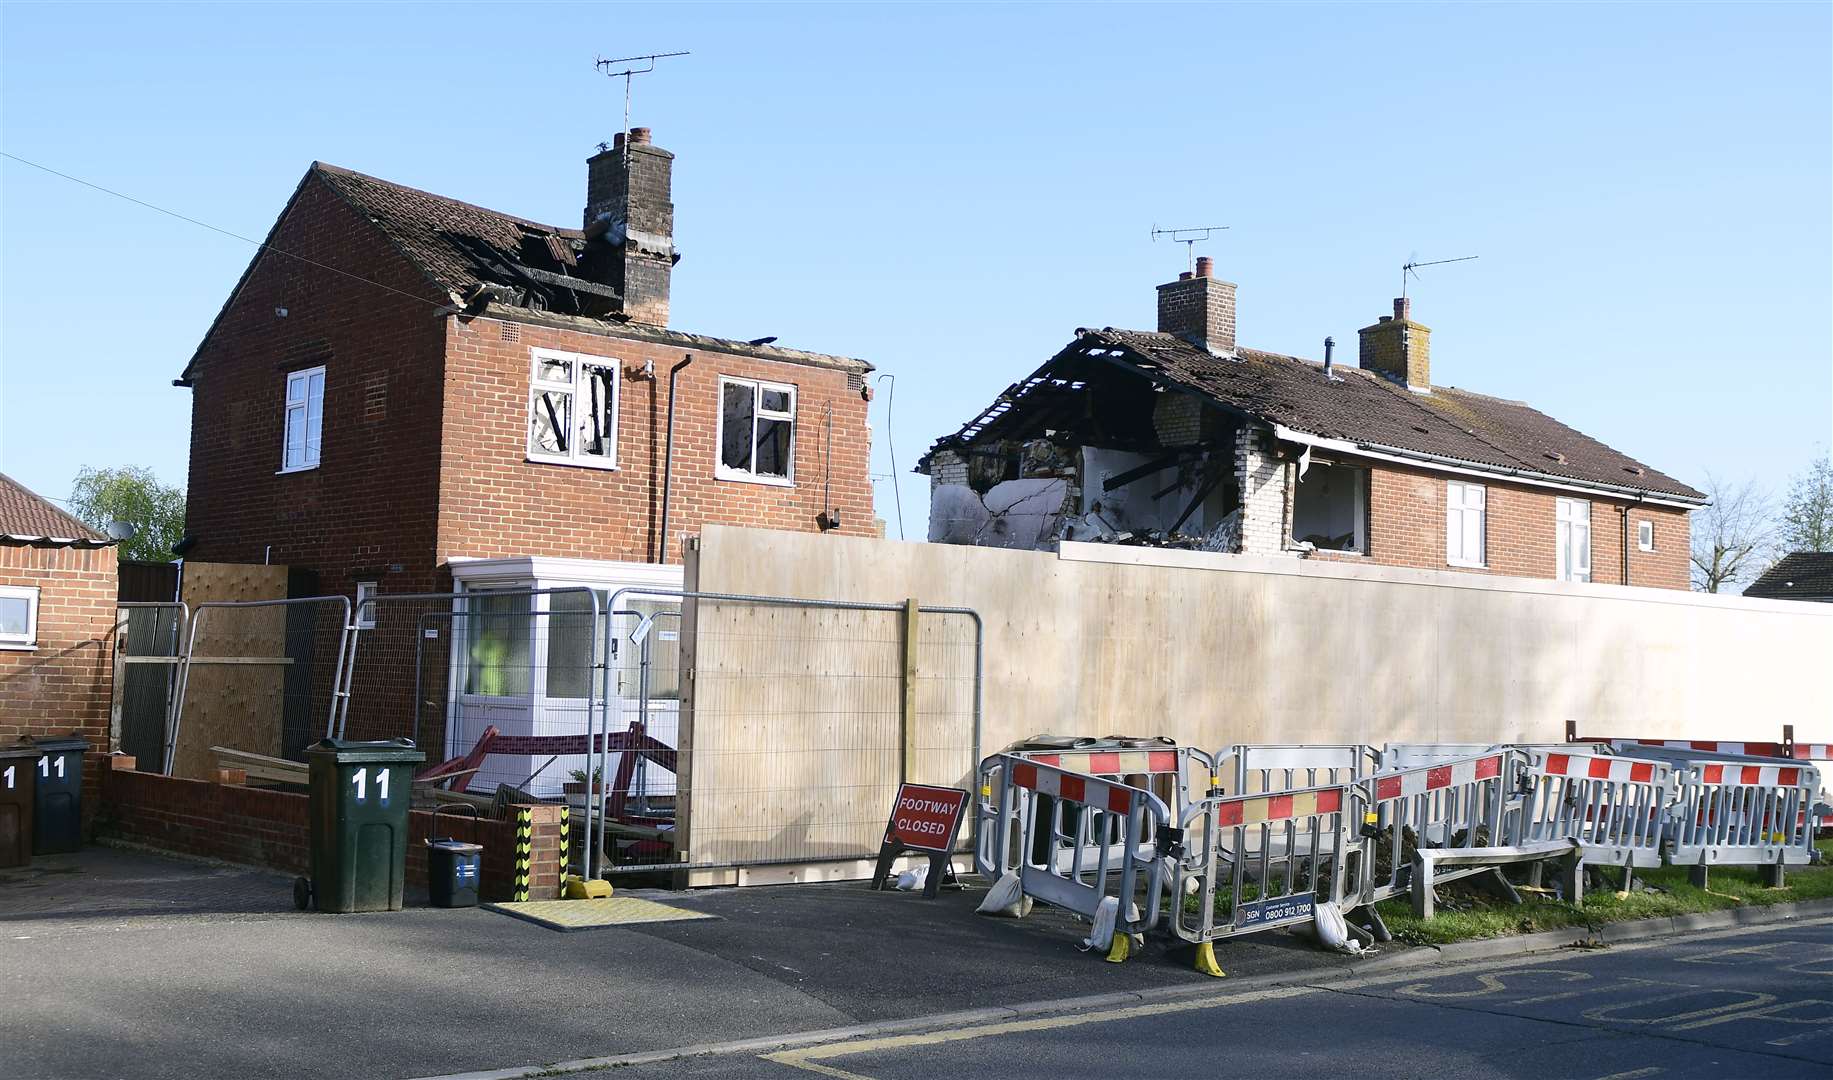 A portable heater sparked the blast in Mill View, Willesborough. Picture: Barry Goodwin